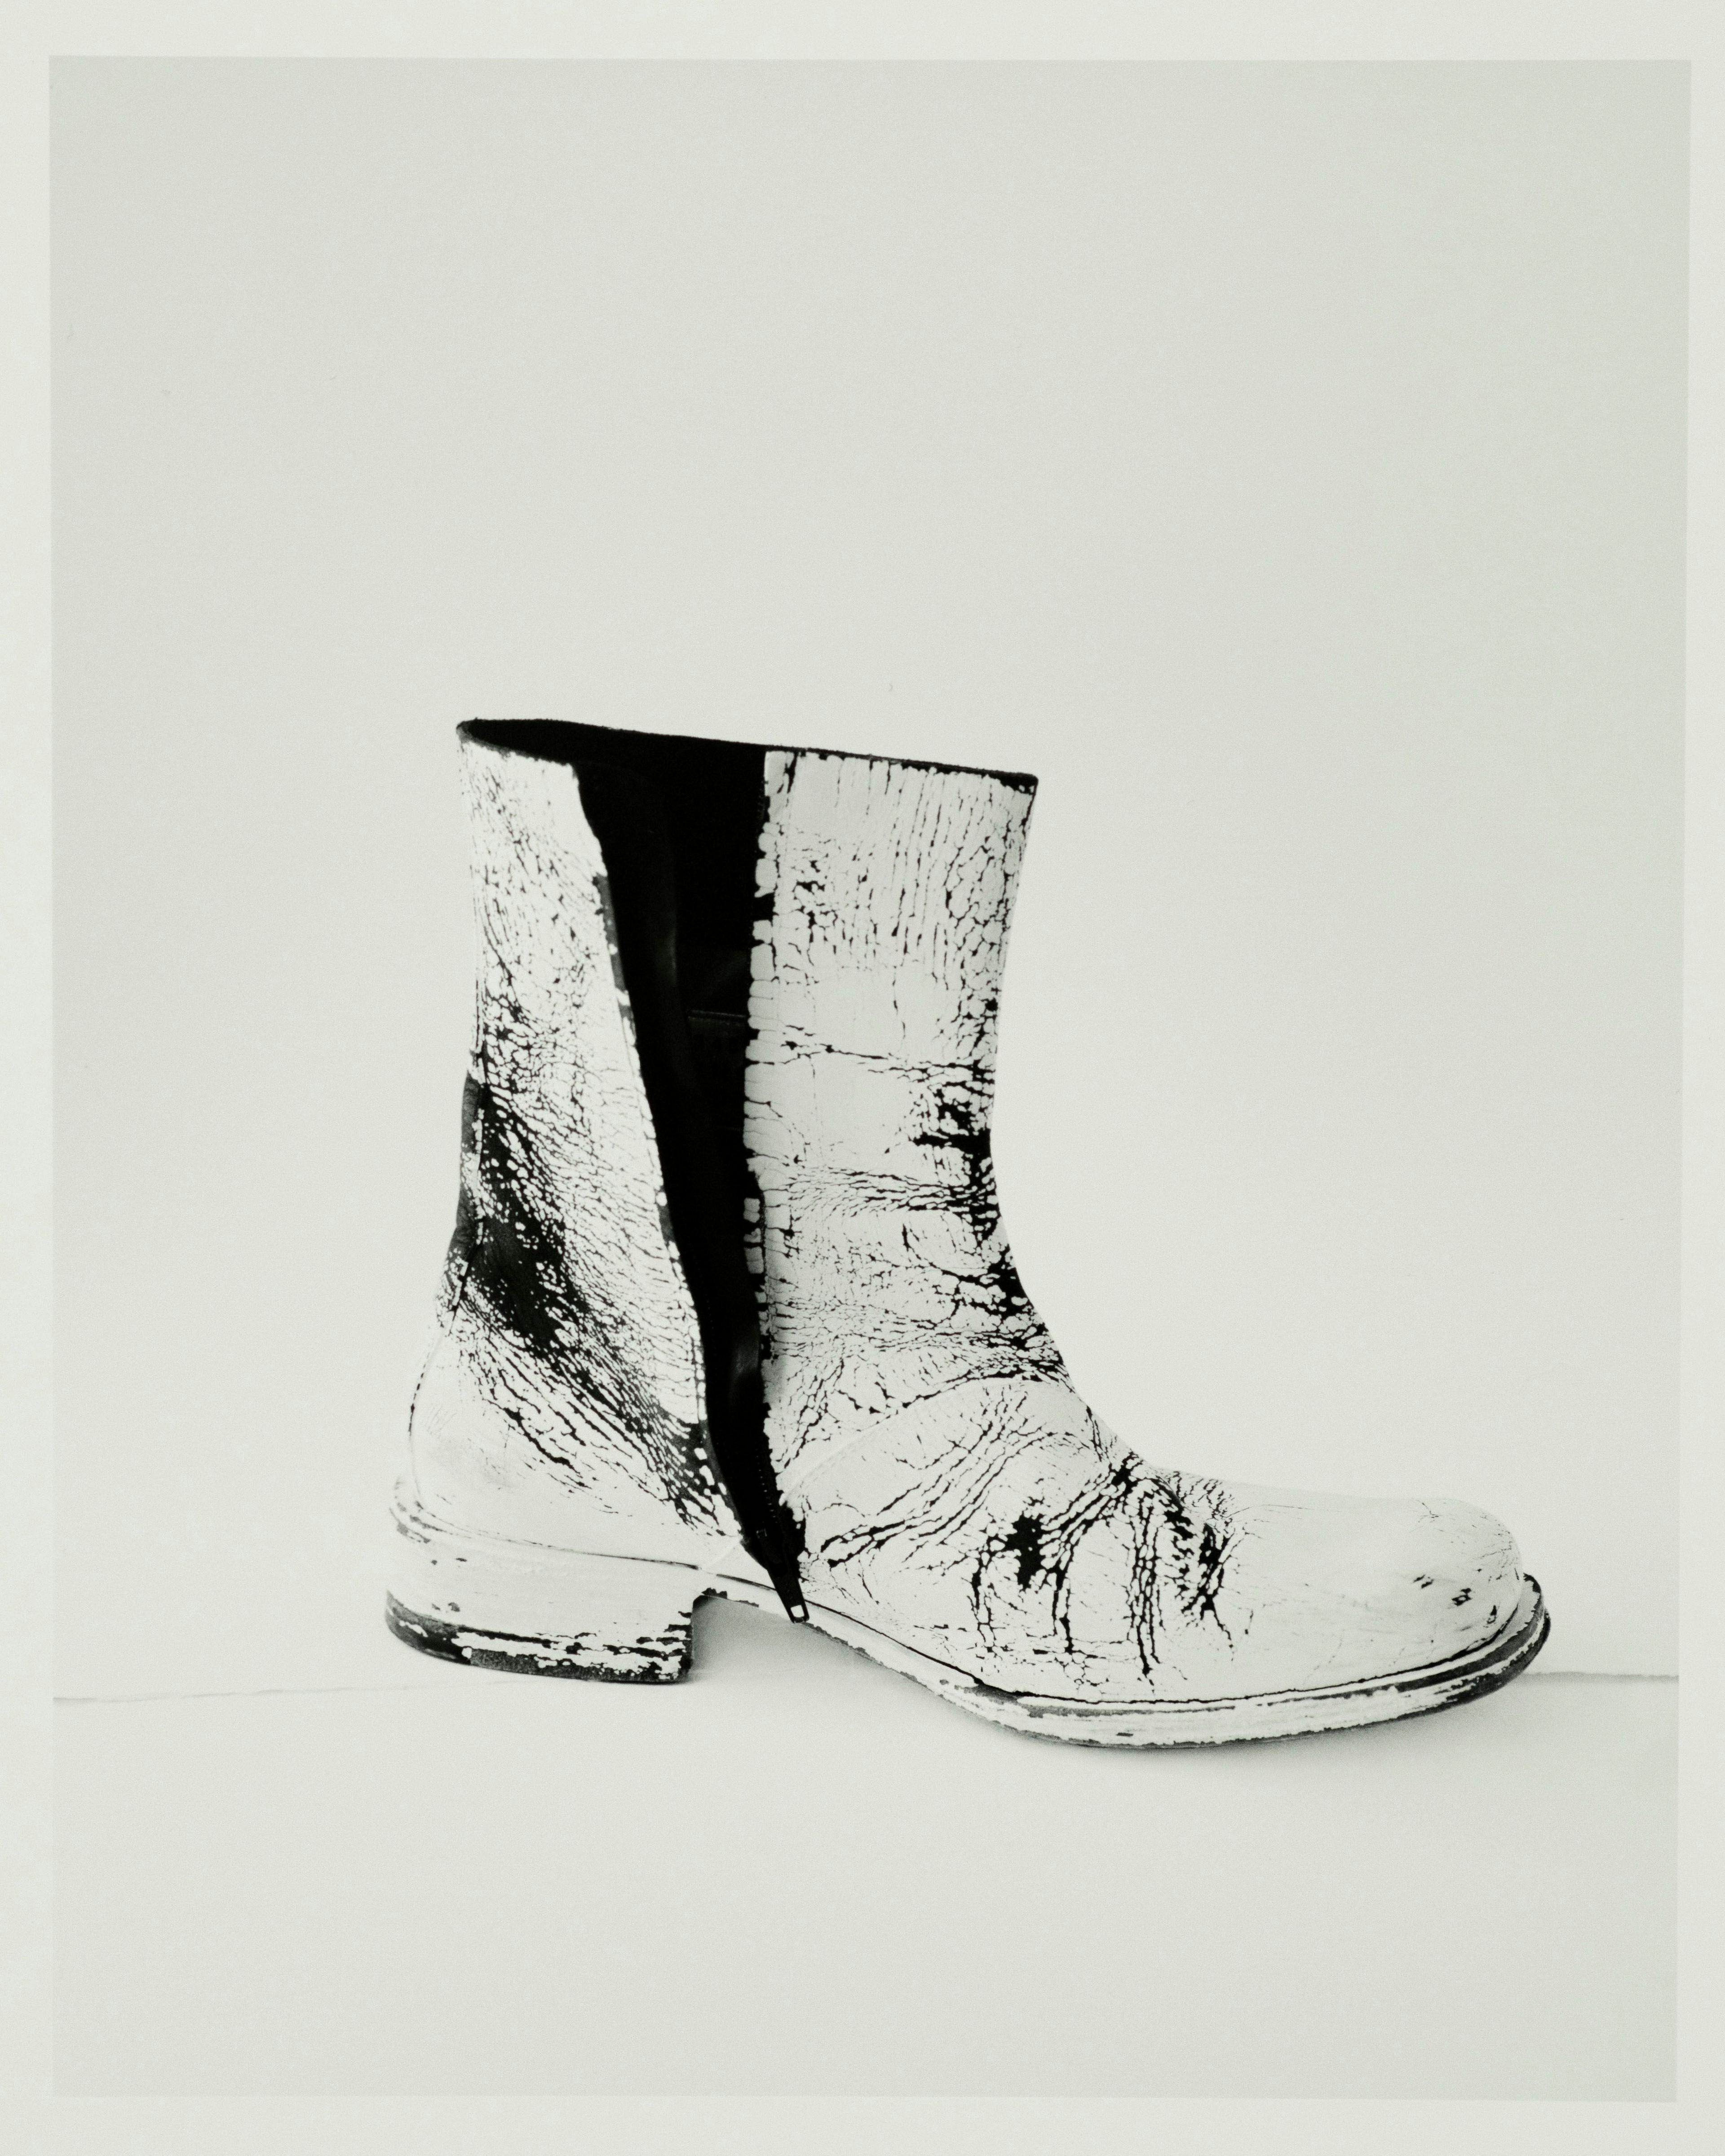 Vintage boots by Maison Martin Margiela, Spring 1999, from Artifact. Having first appeared as a prototype at the Spring 1999 show, these boots, with their cracked paint finish, reflect Martin Margiela's deconstructionist approach. The designer avoided interviews about his collections to allow room for multiple interpretations.